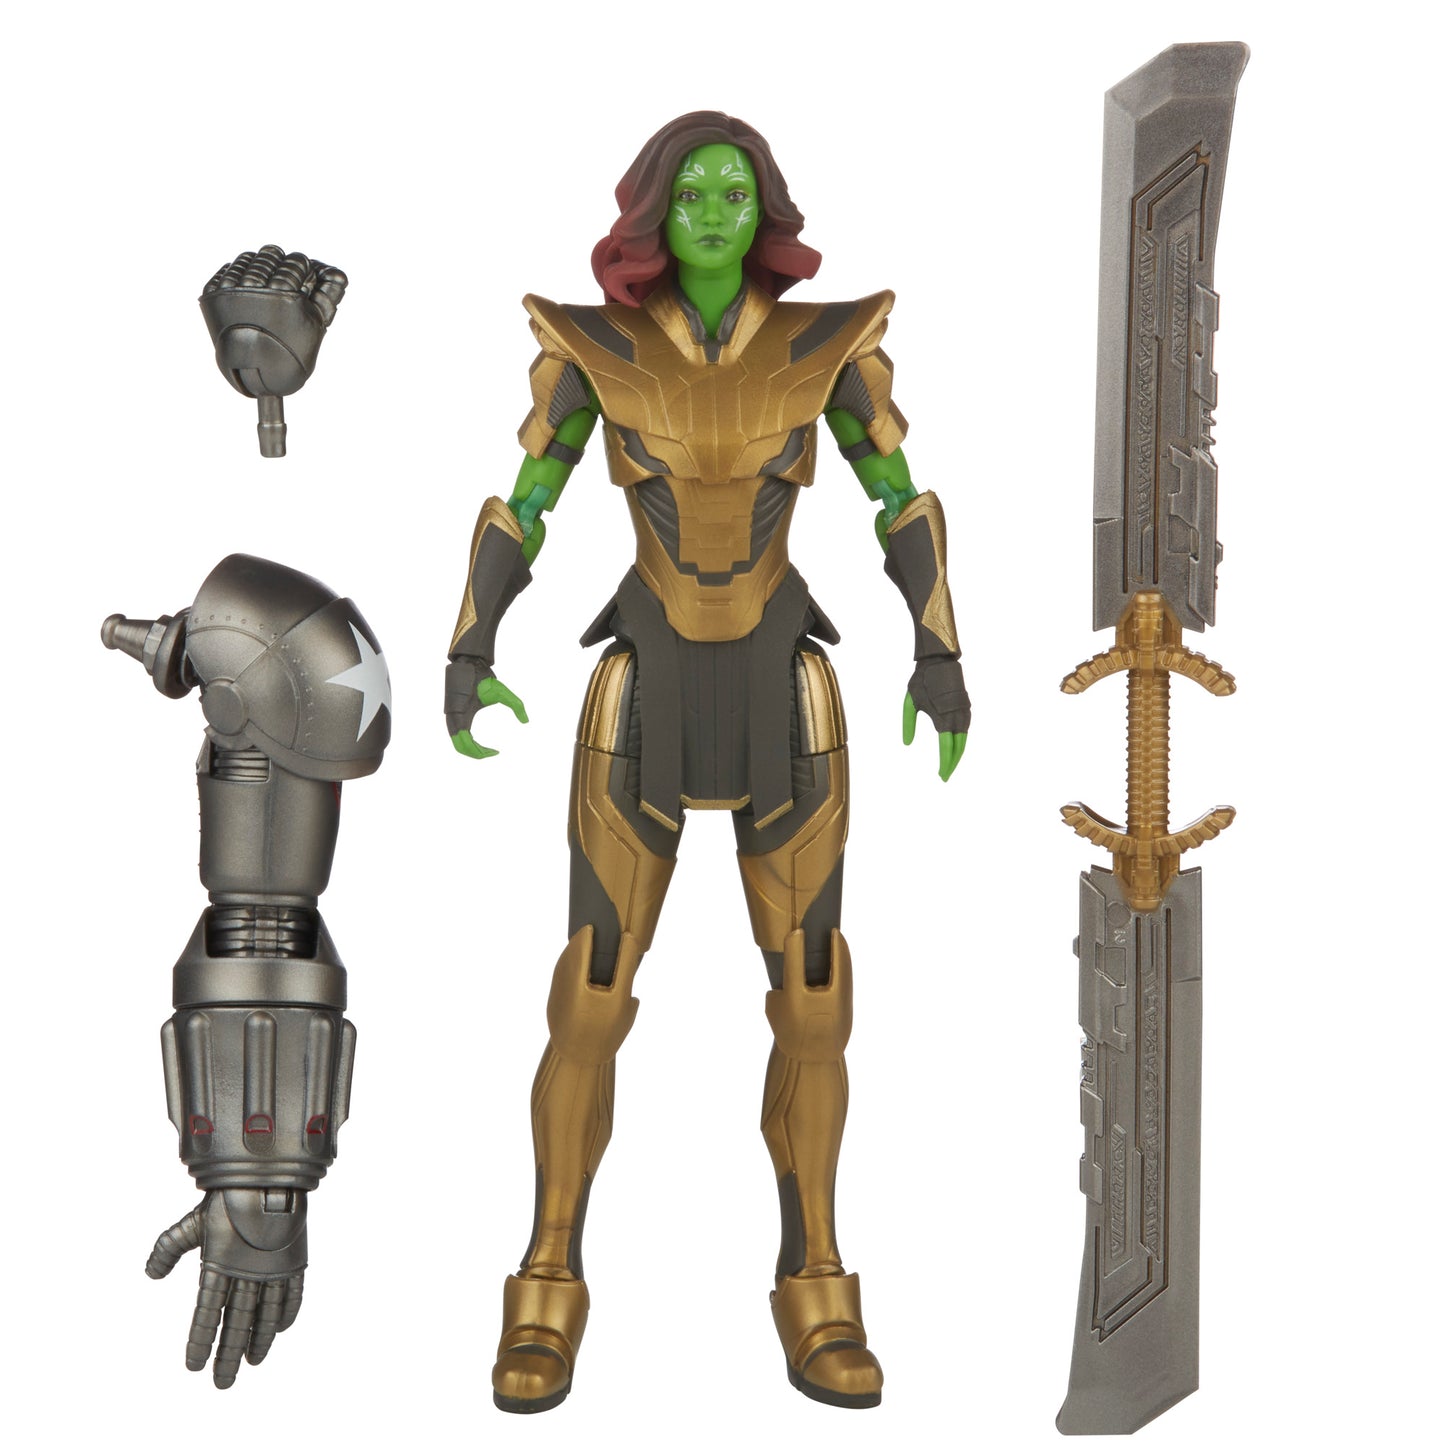 Marvel Legends Series Warrior Gamora Action Figure 6-Inch Toy with accessories - Heretoserveyou